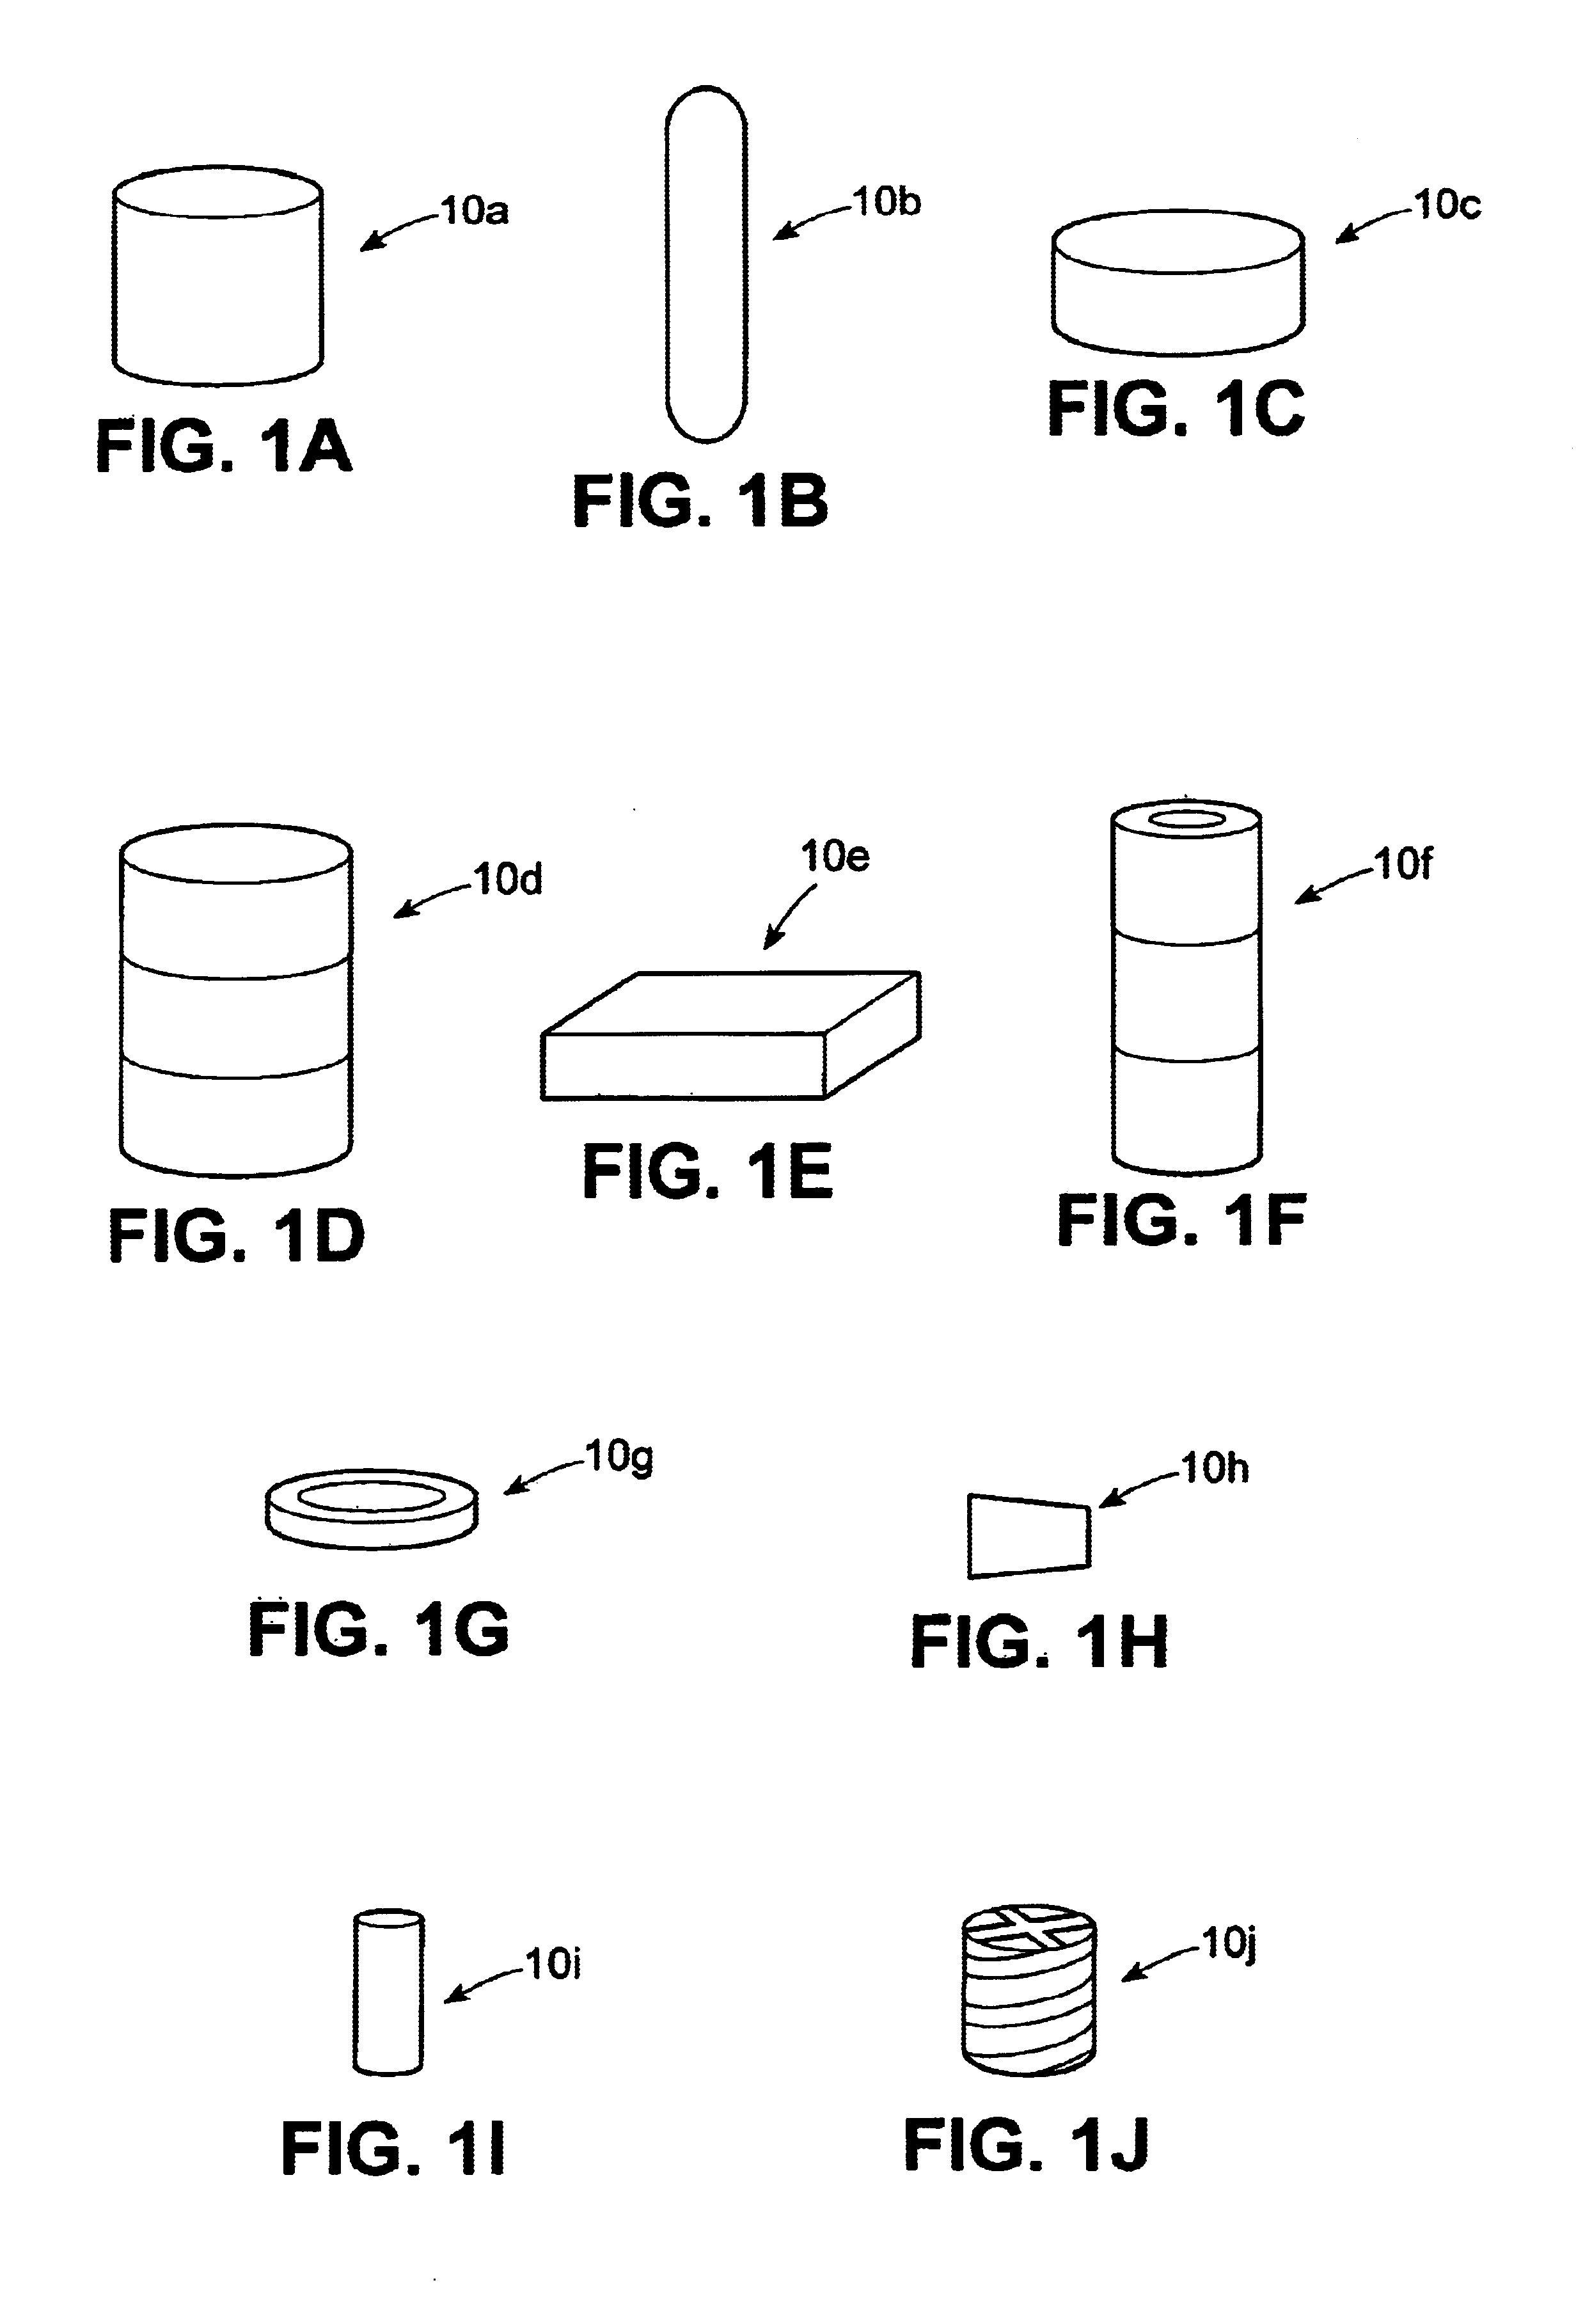 Bioabsorbable plugs containing drugs